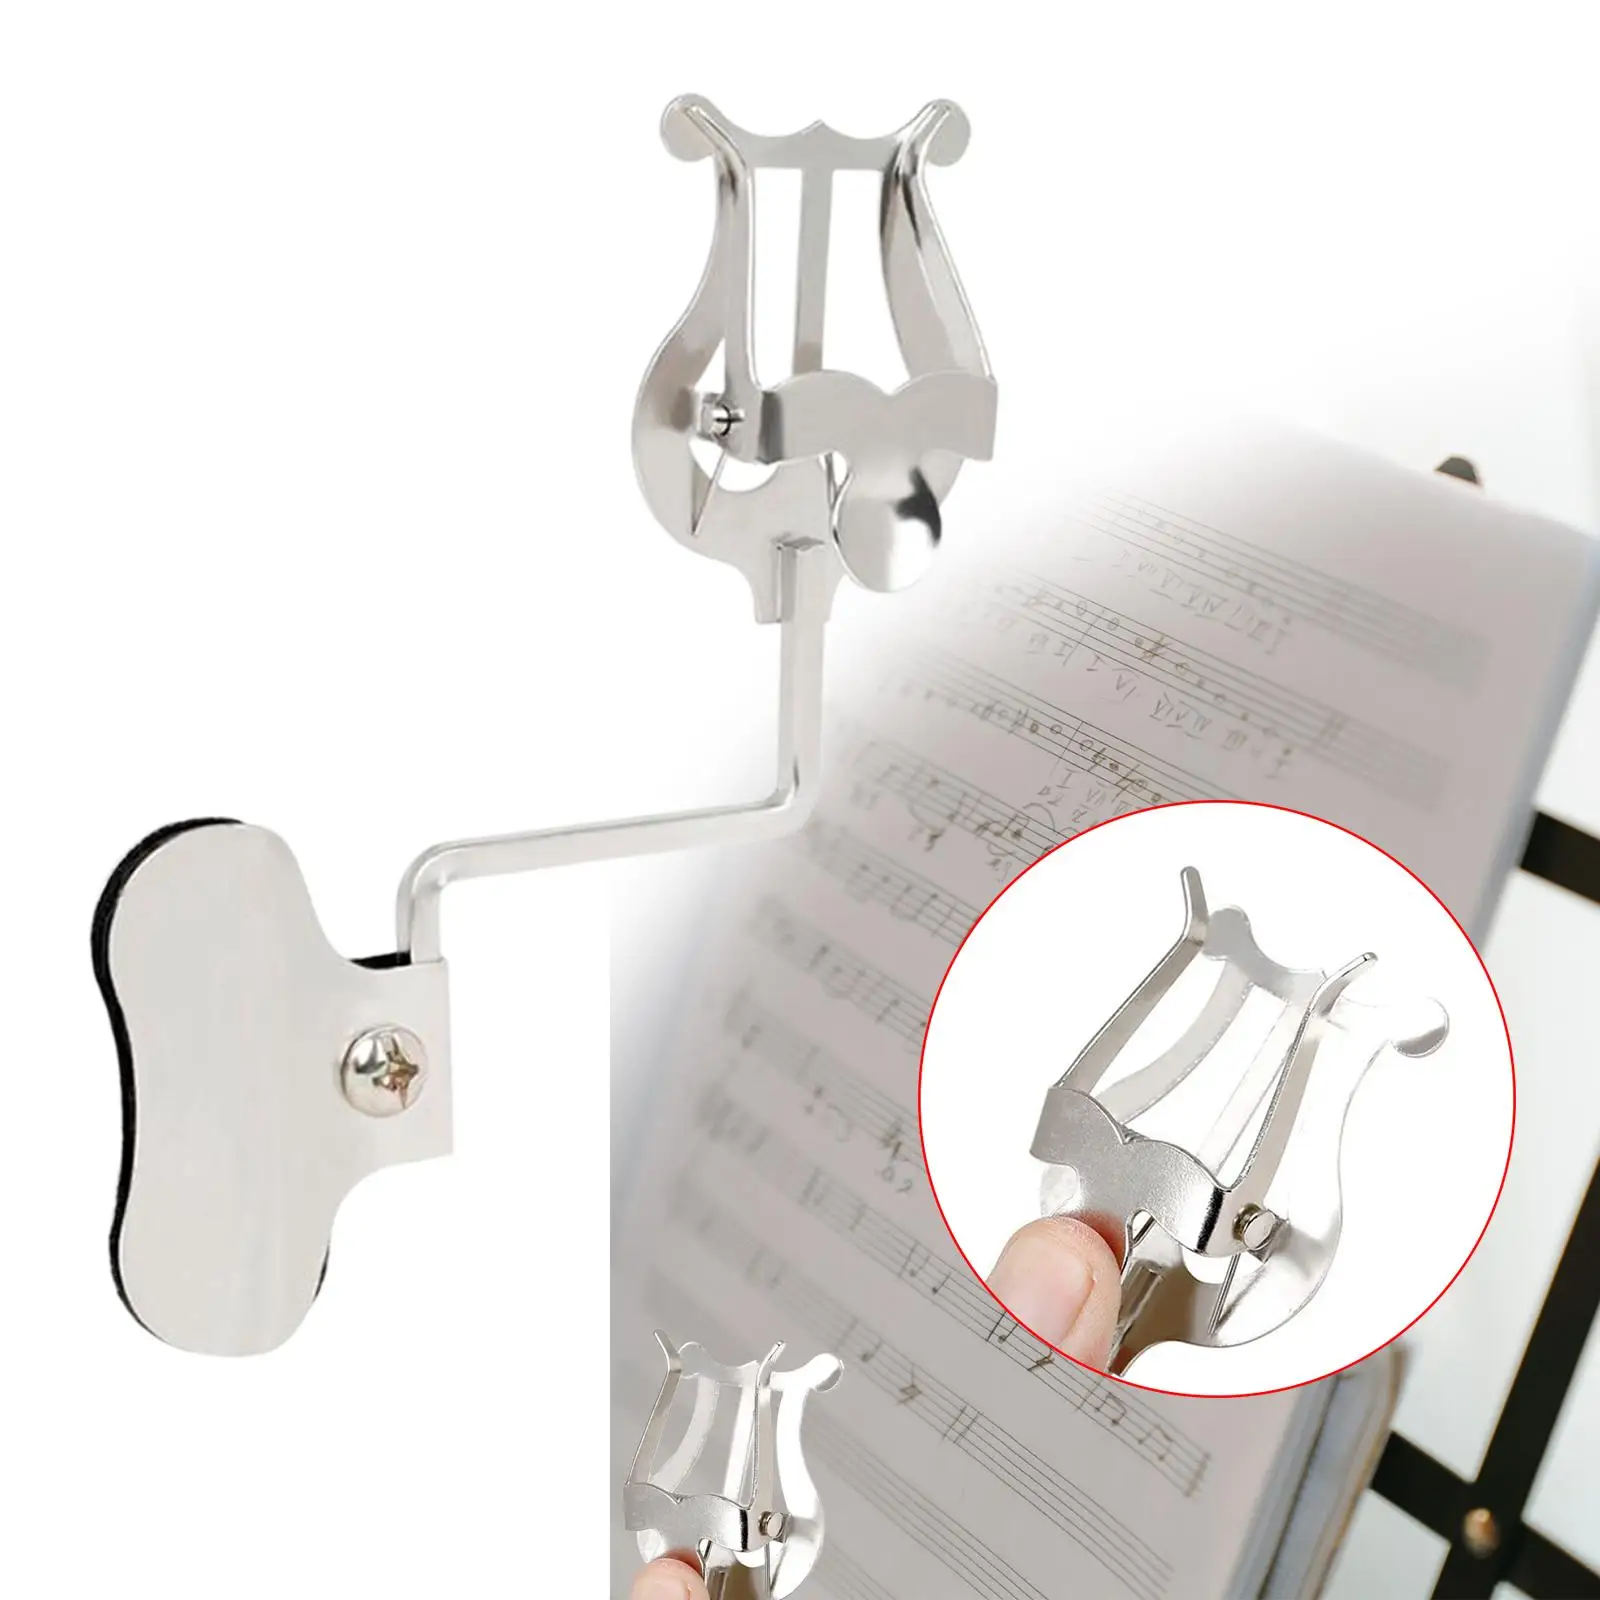 Trumpet Marching Lyre Music Sheet Binder Music Sheet Clip Portable Metal Trombone Music Clip for Exercise Saxophone Daily Use